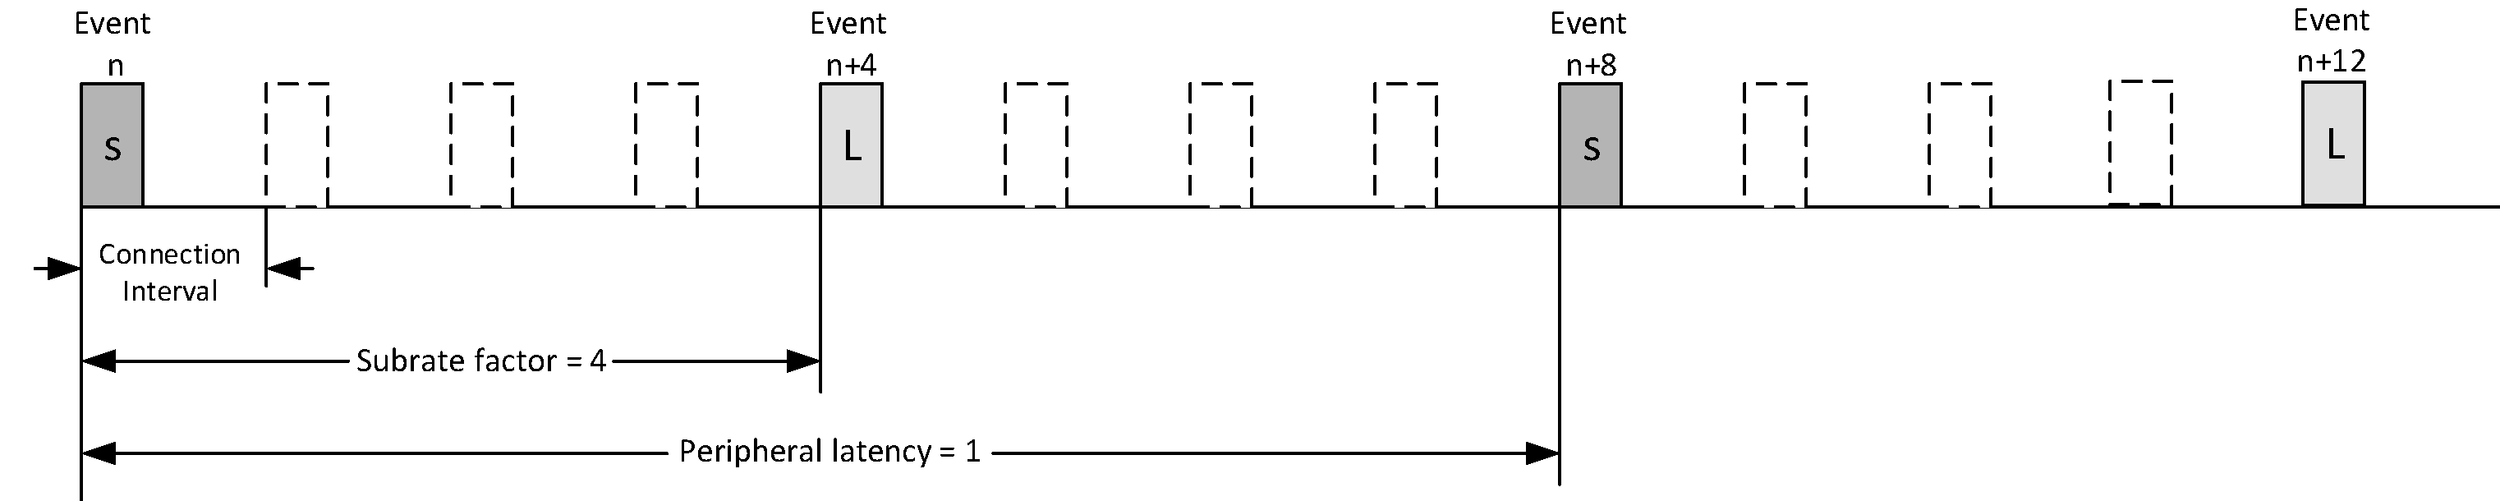 Connection events used when connSubrateFactor = 4, connPeripheralLatency = 1, and connContinuationNumber = 0